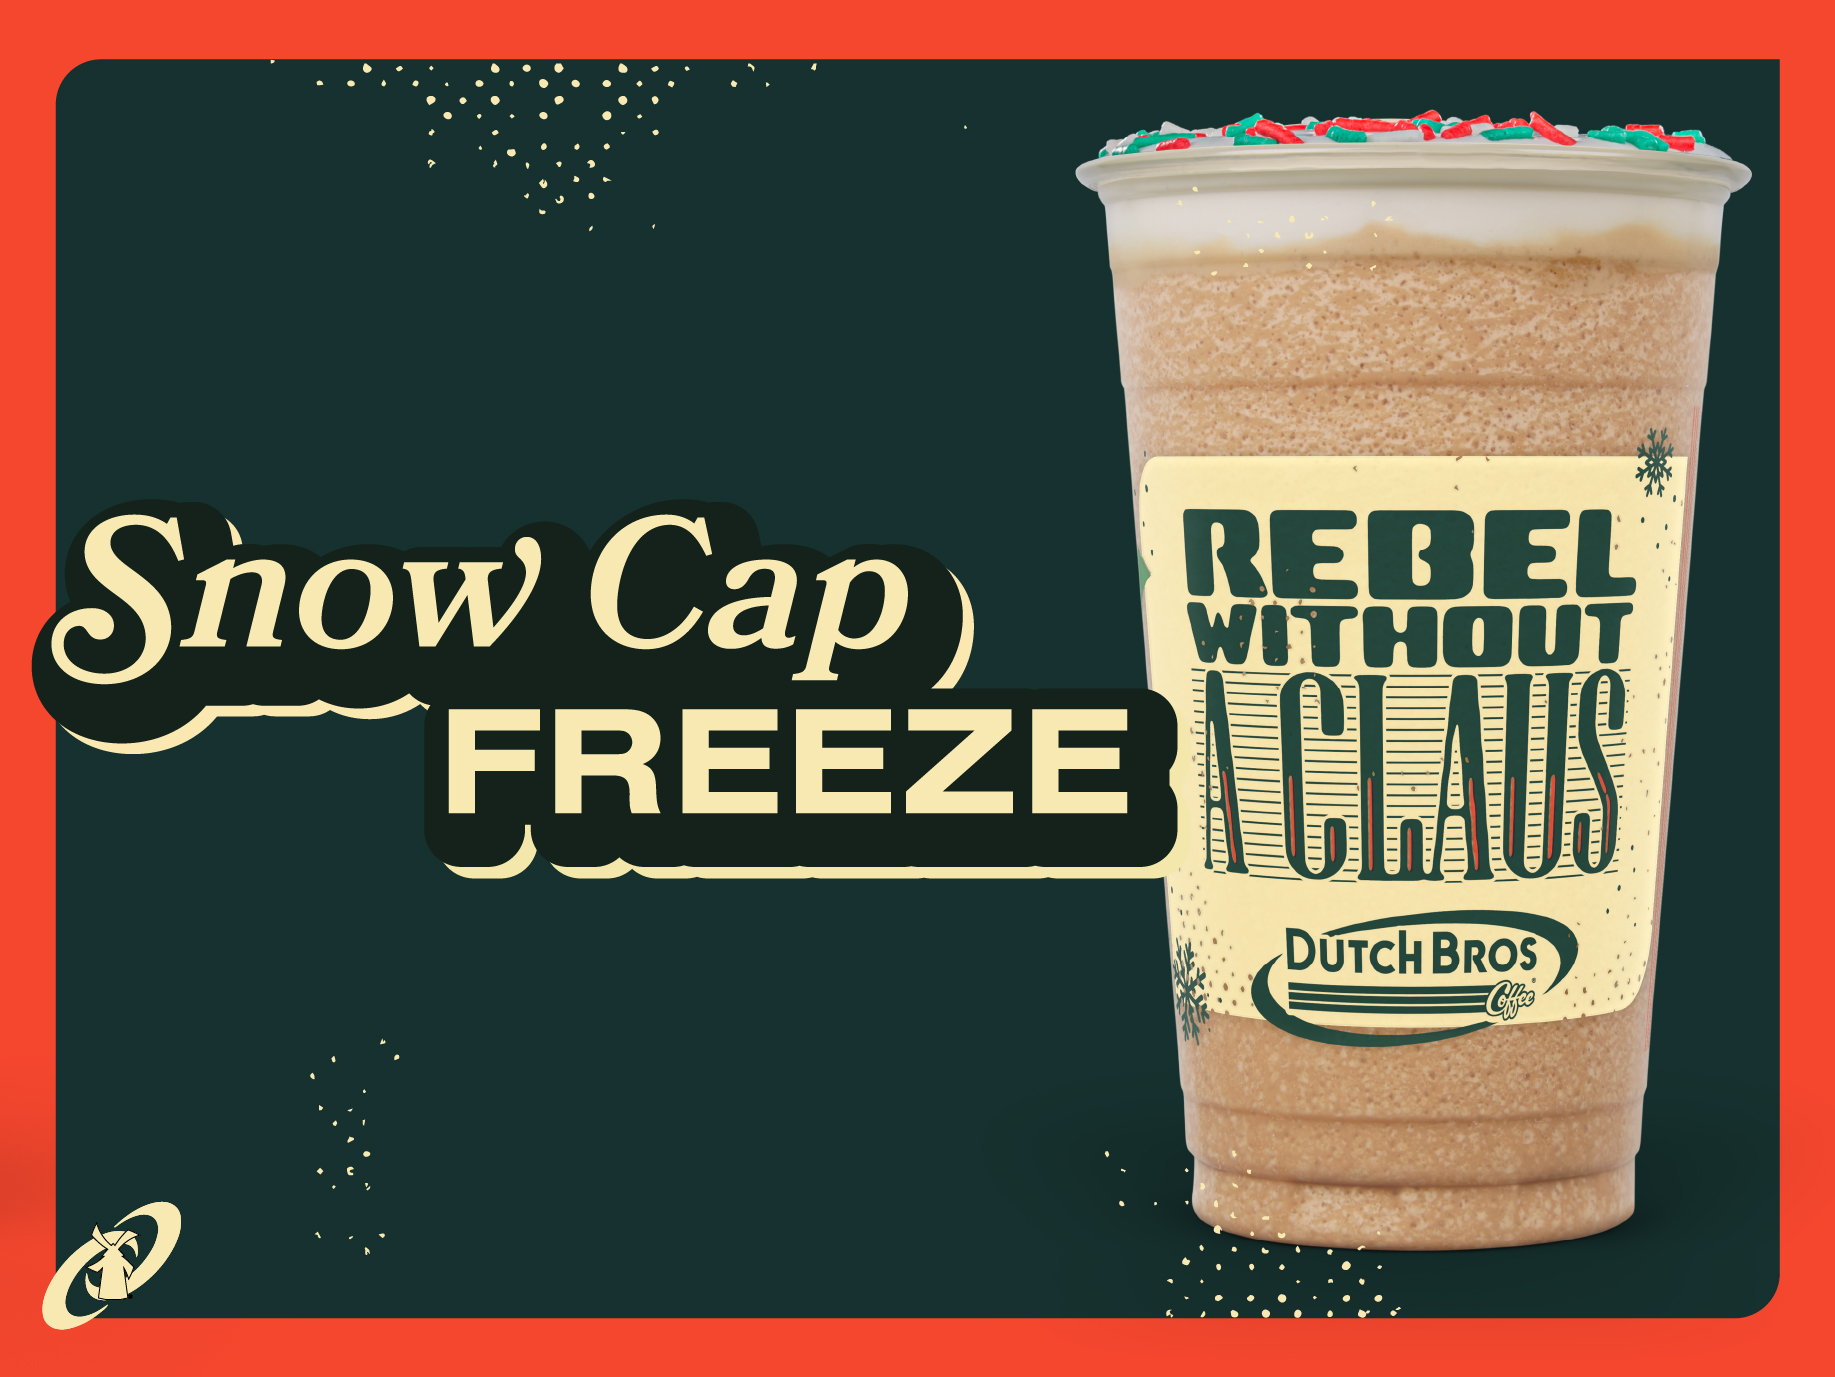 Snow Cap Freeze: The Snow Cap Freeze features cupcake flavor in a Dutch Freeze (Dutch Bros frozen coffee) finished with Soft Top and holiday sprinks.